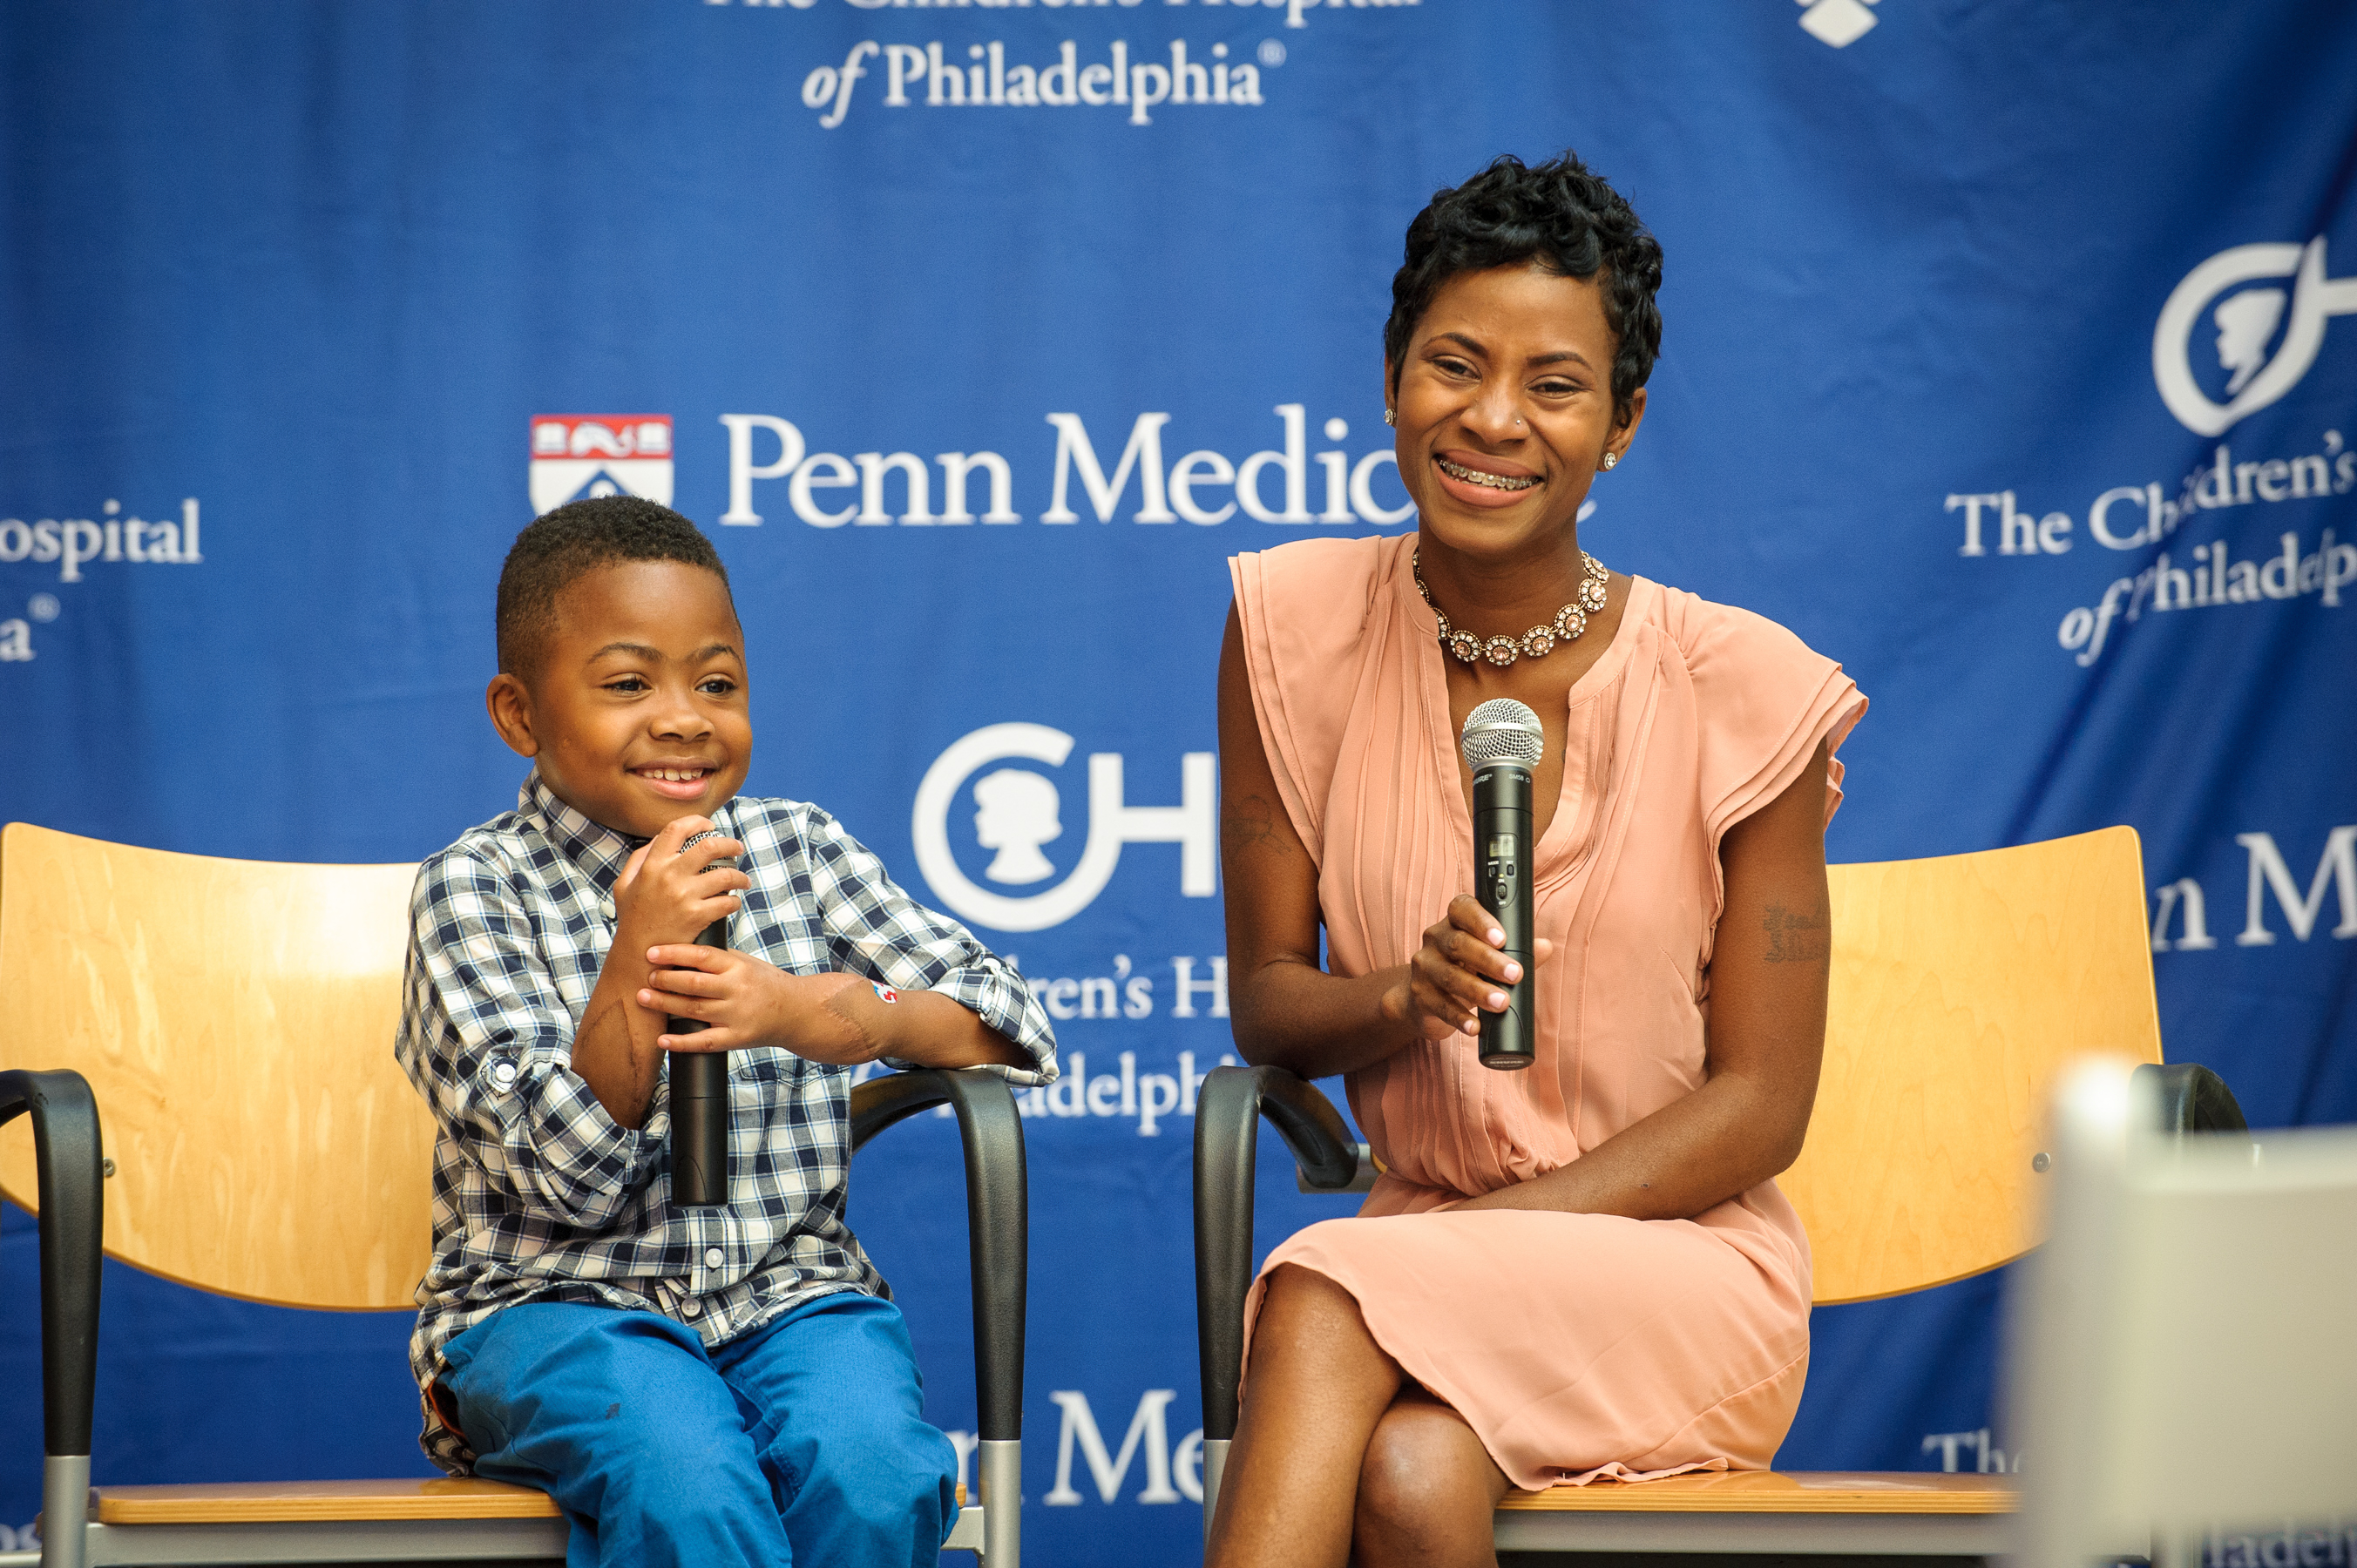 Penn Medicine and CHOP patient Zion Harvey was the first pediatric patient to undergo a bilateral hand transplant.